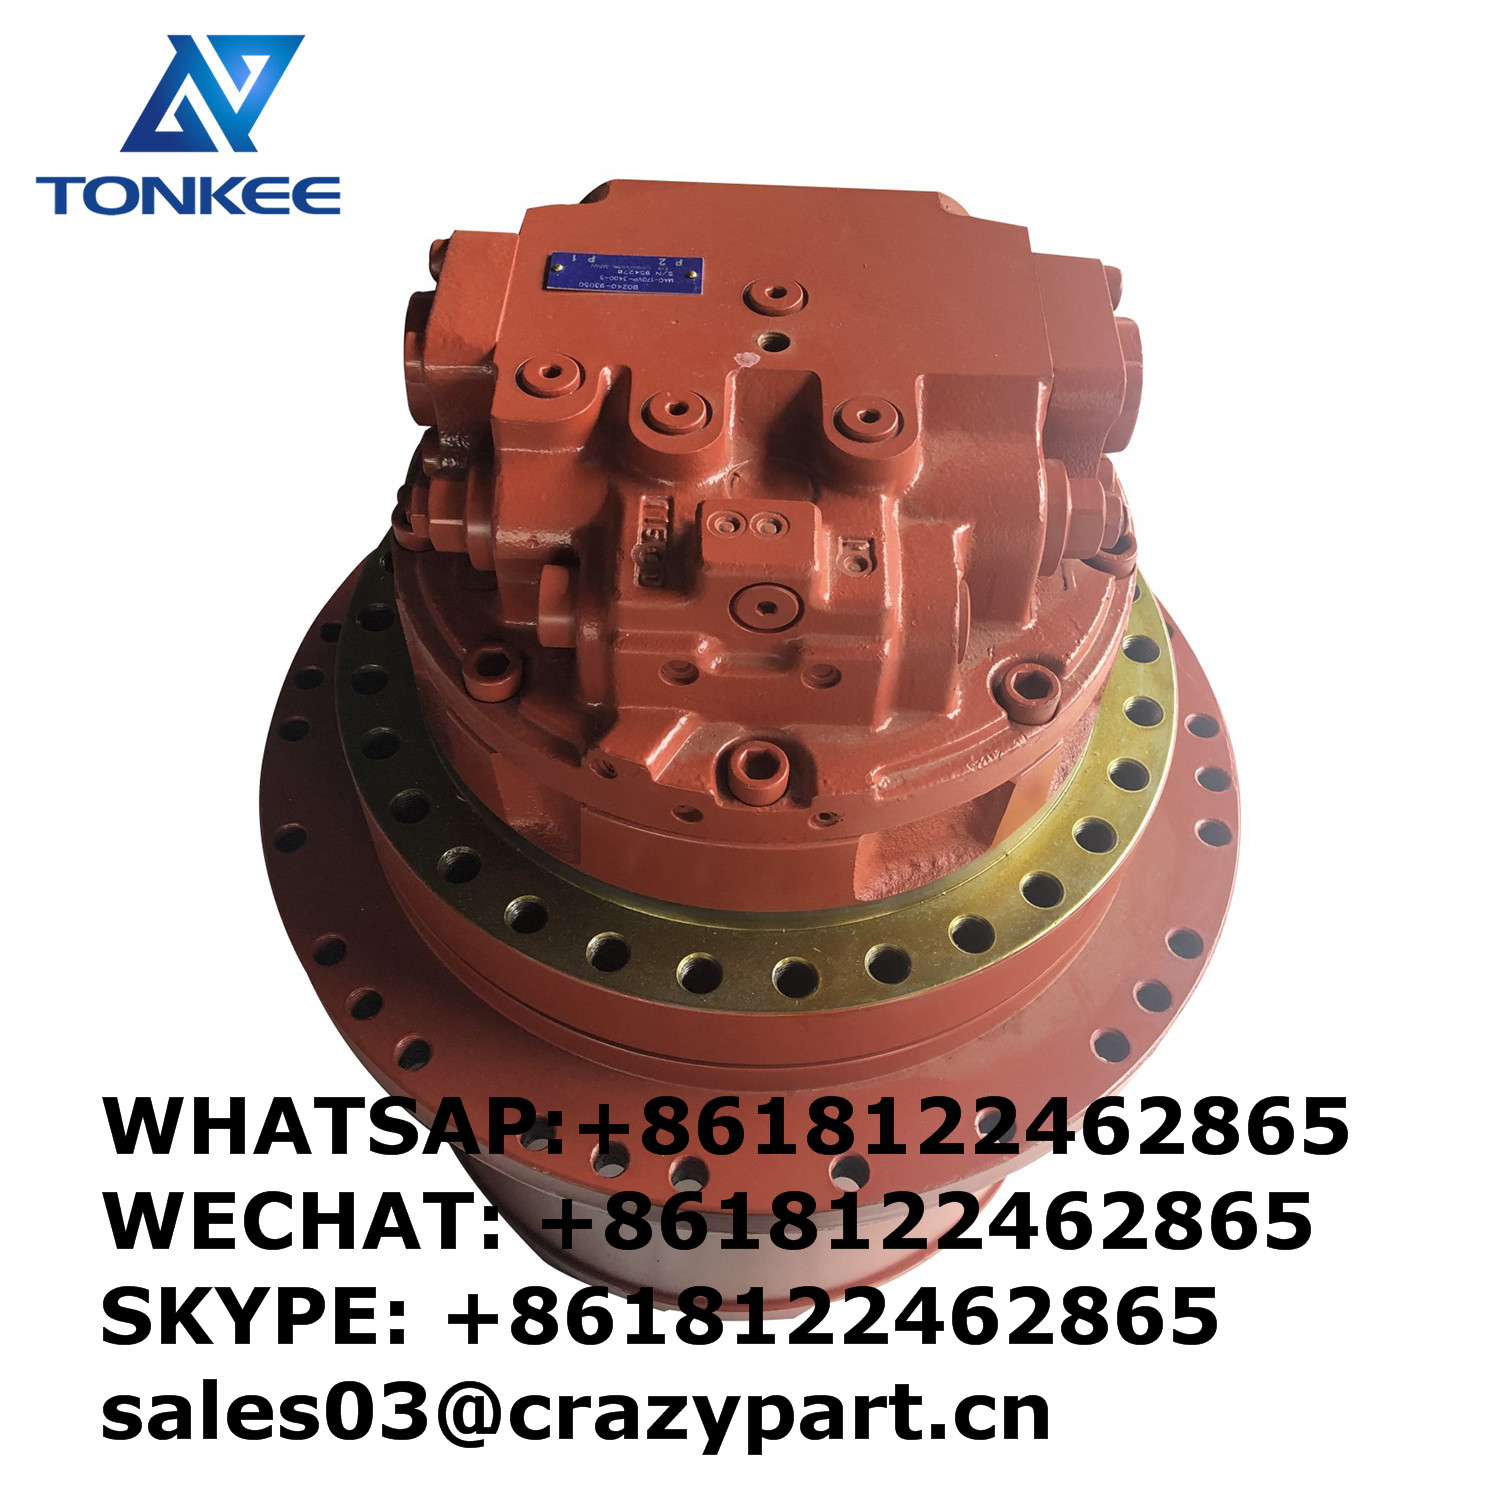 MAG-170VP-3400E B0240-93021 final drive group assy CX210 year 2001 CX210B travel motor assembly suitable for CASE